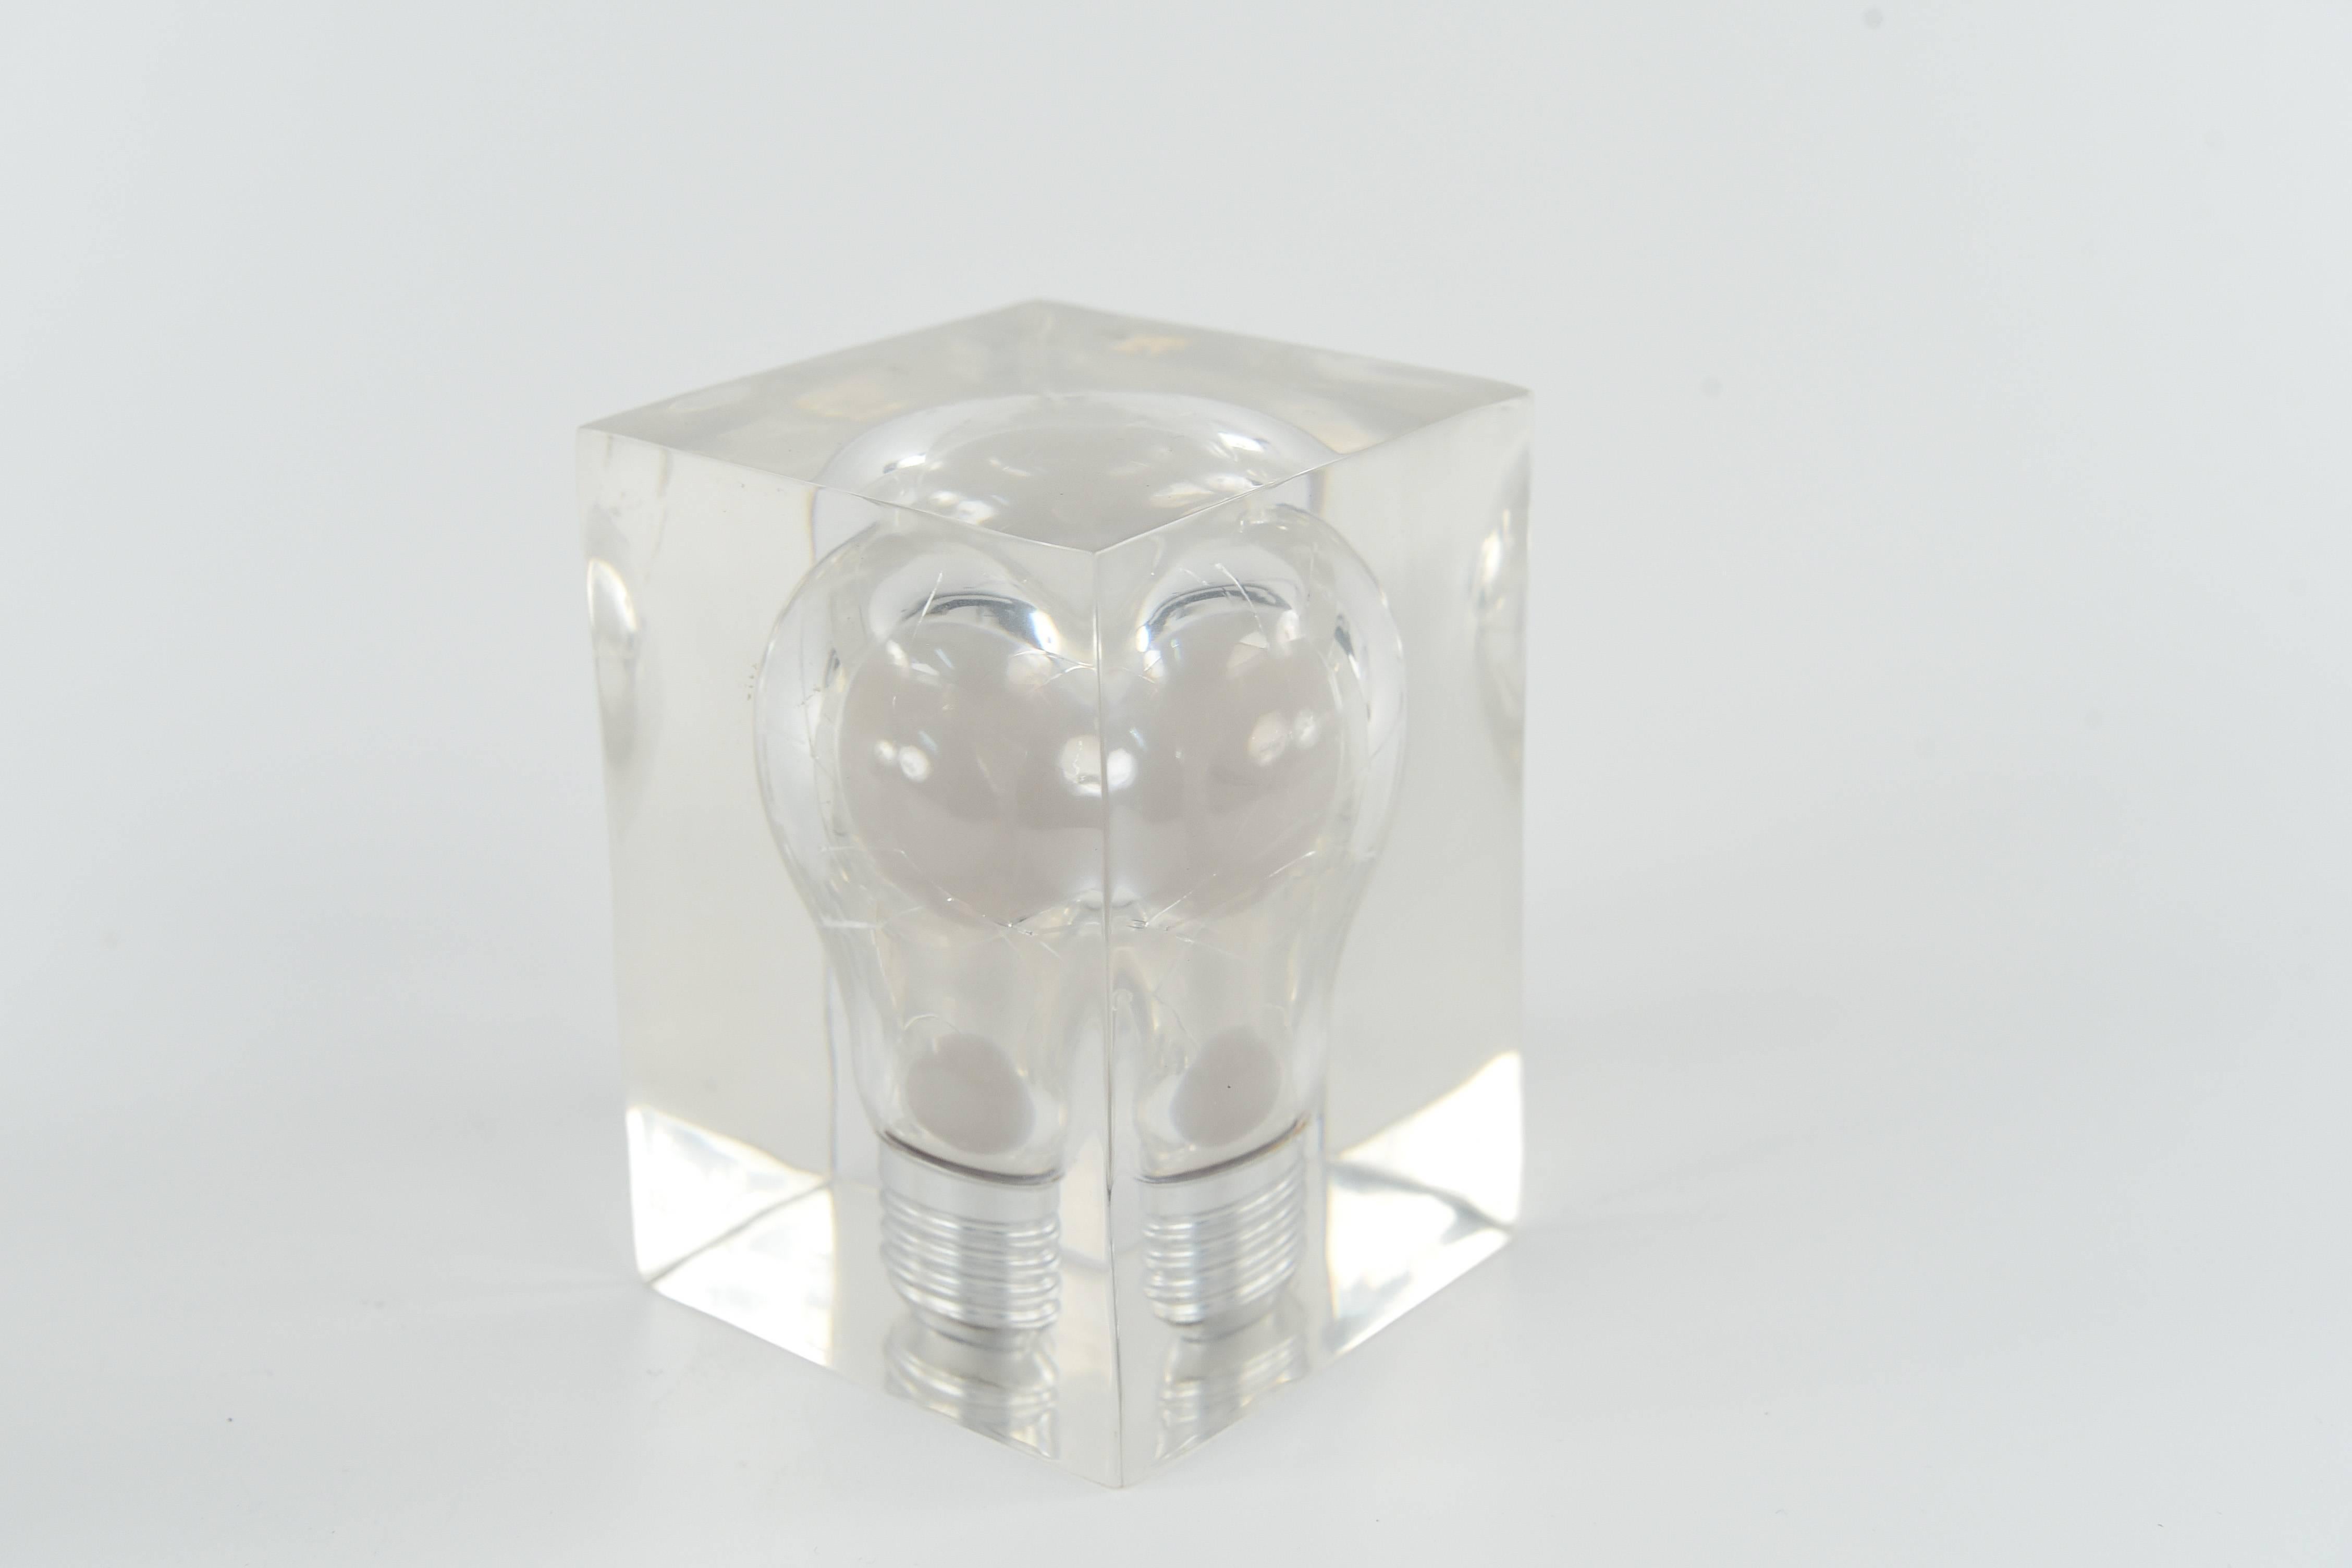 A very interesting light bulb suspended in a Lucite cube, a very cool decorative accent to any shelf or table.